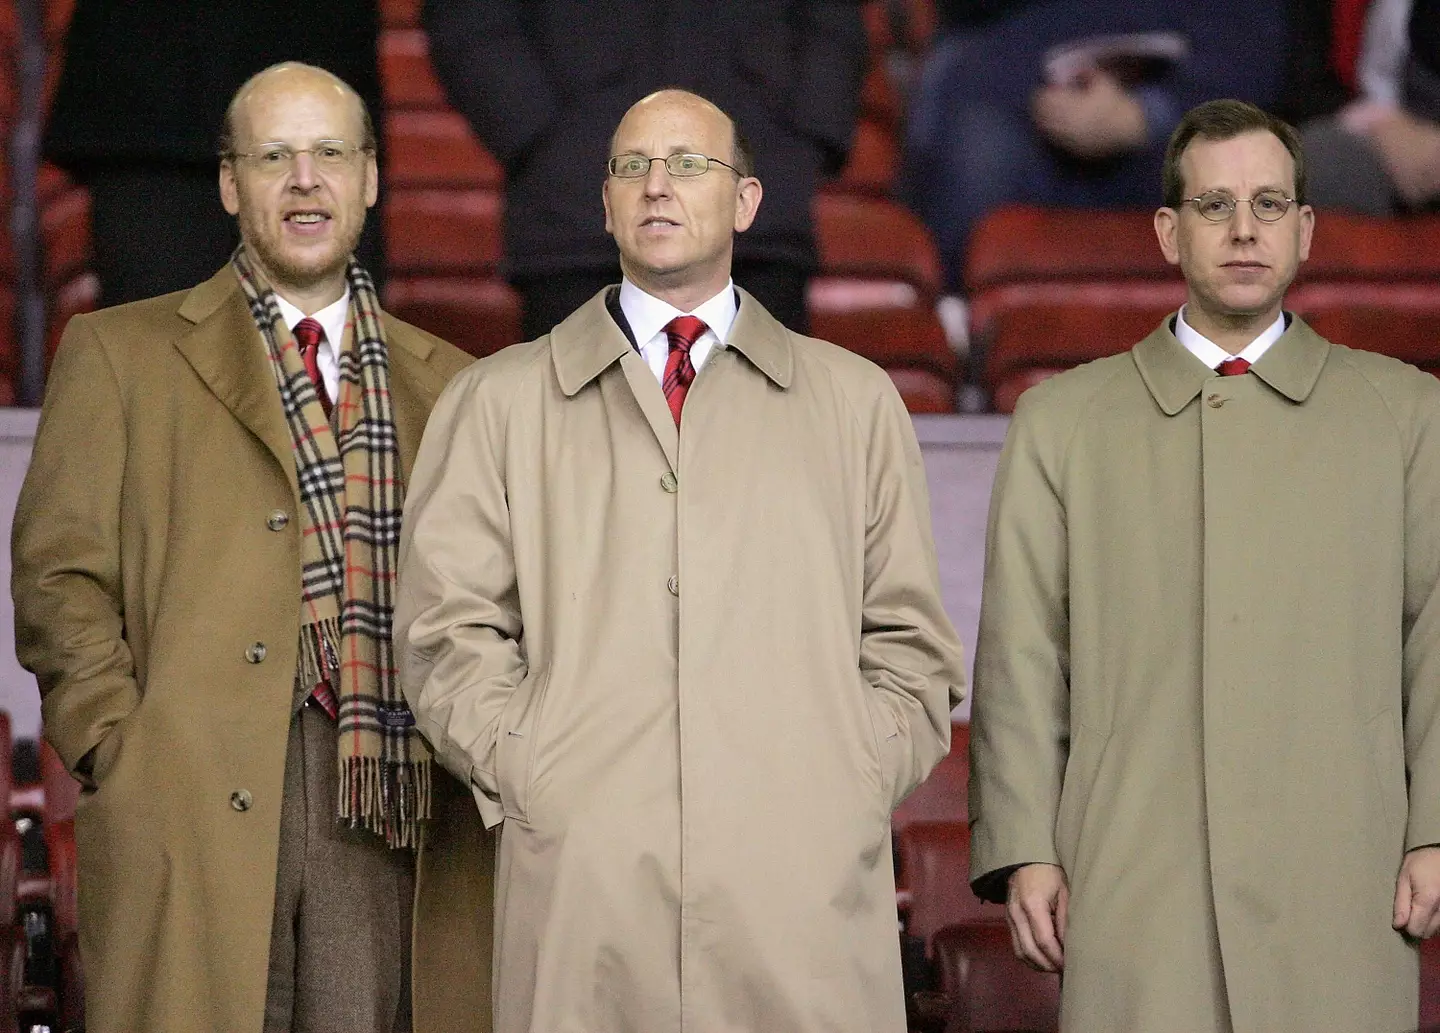 The Glazers are reportedly looking for £10 billion to sell Manchester United.